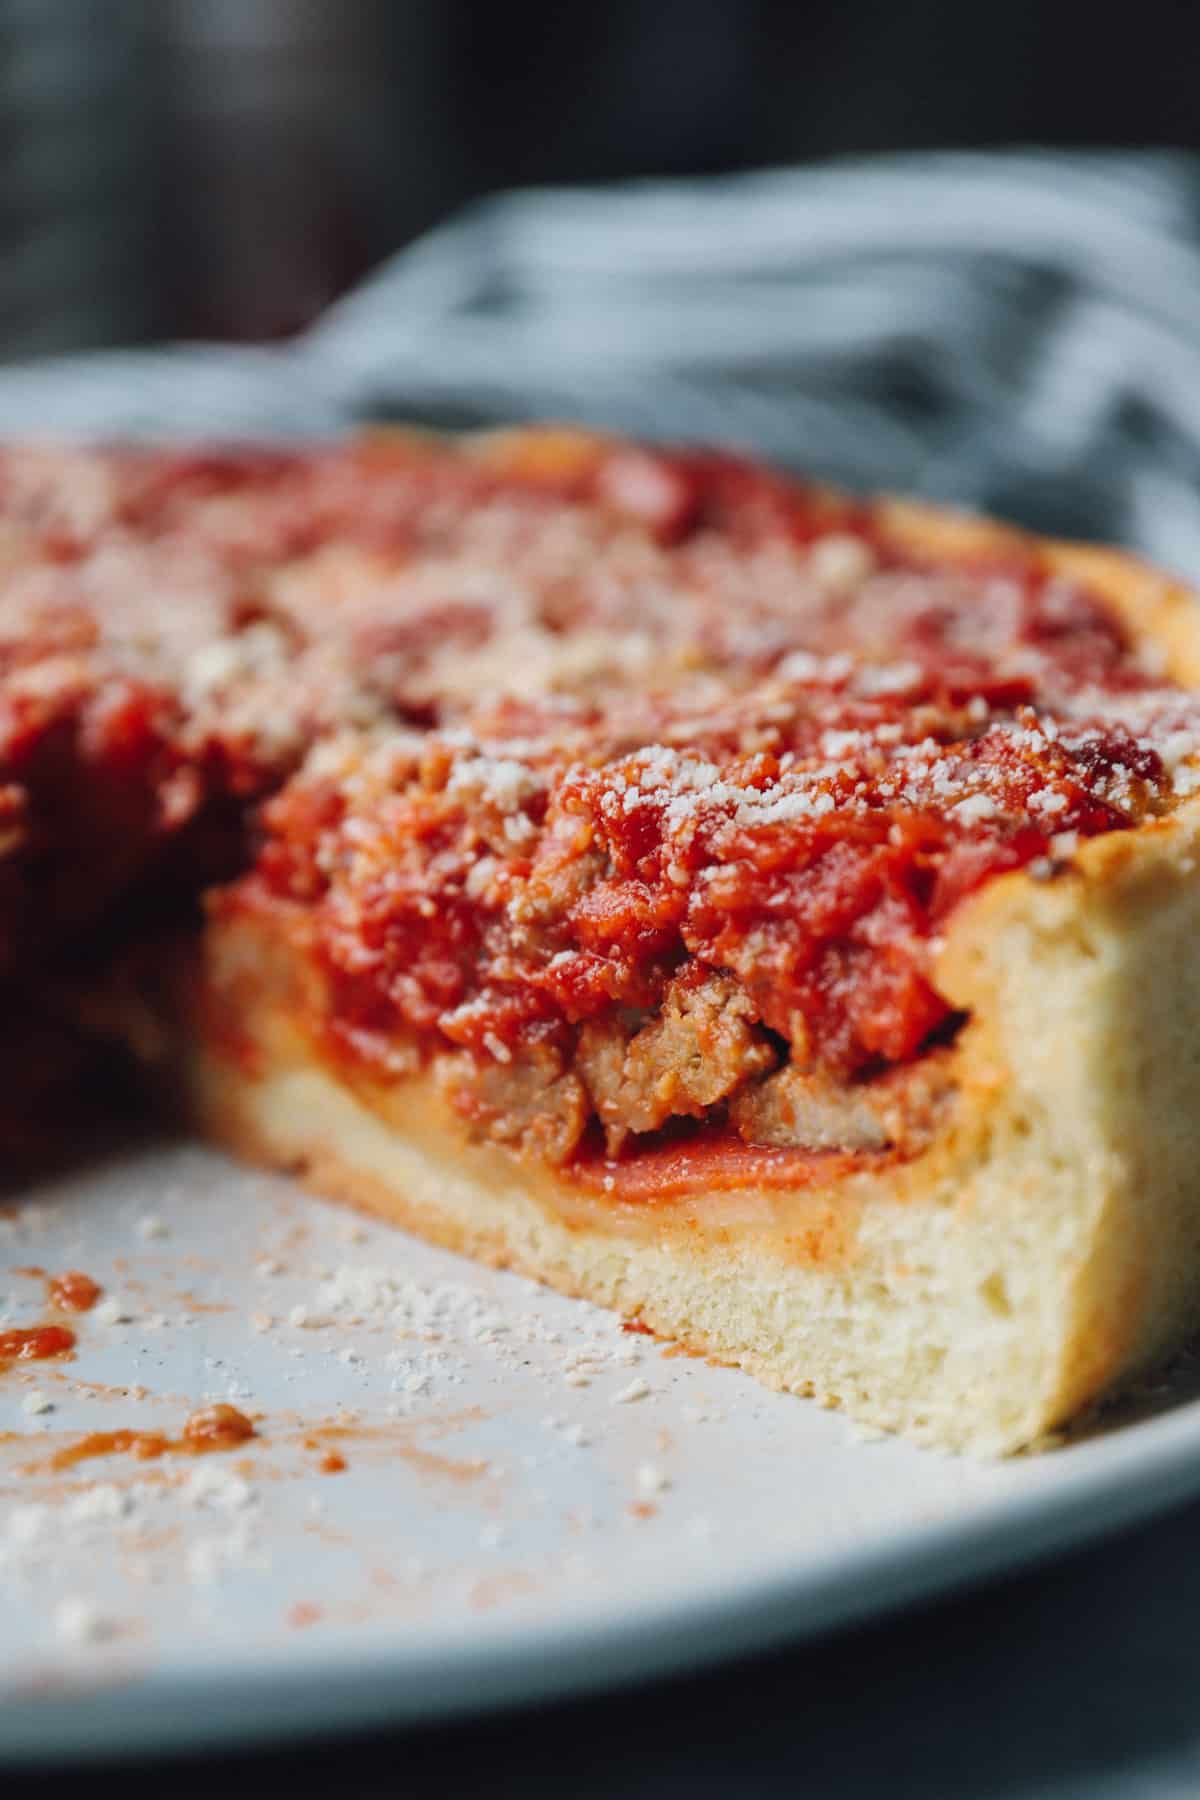 https://www.thecookierookie.com/wp-content/uploads/2022/12/Chicago-Style-Deep-Dish-Pizza-4.jpg